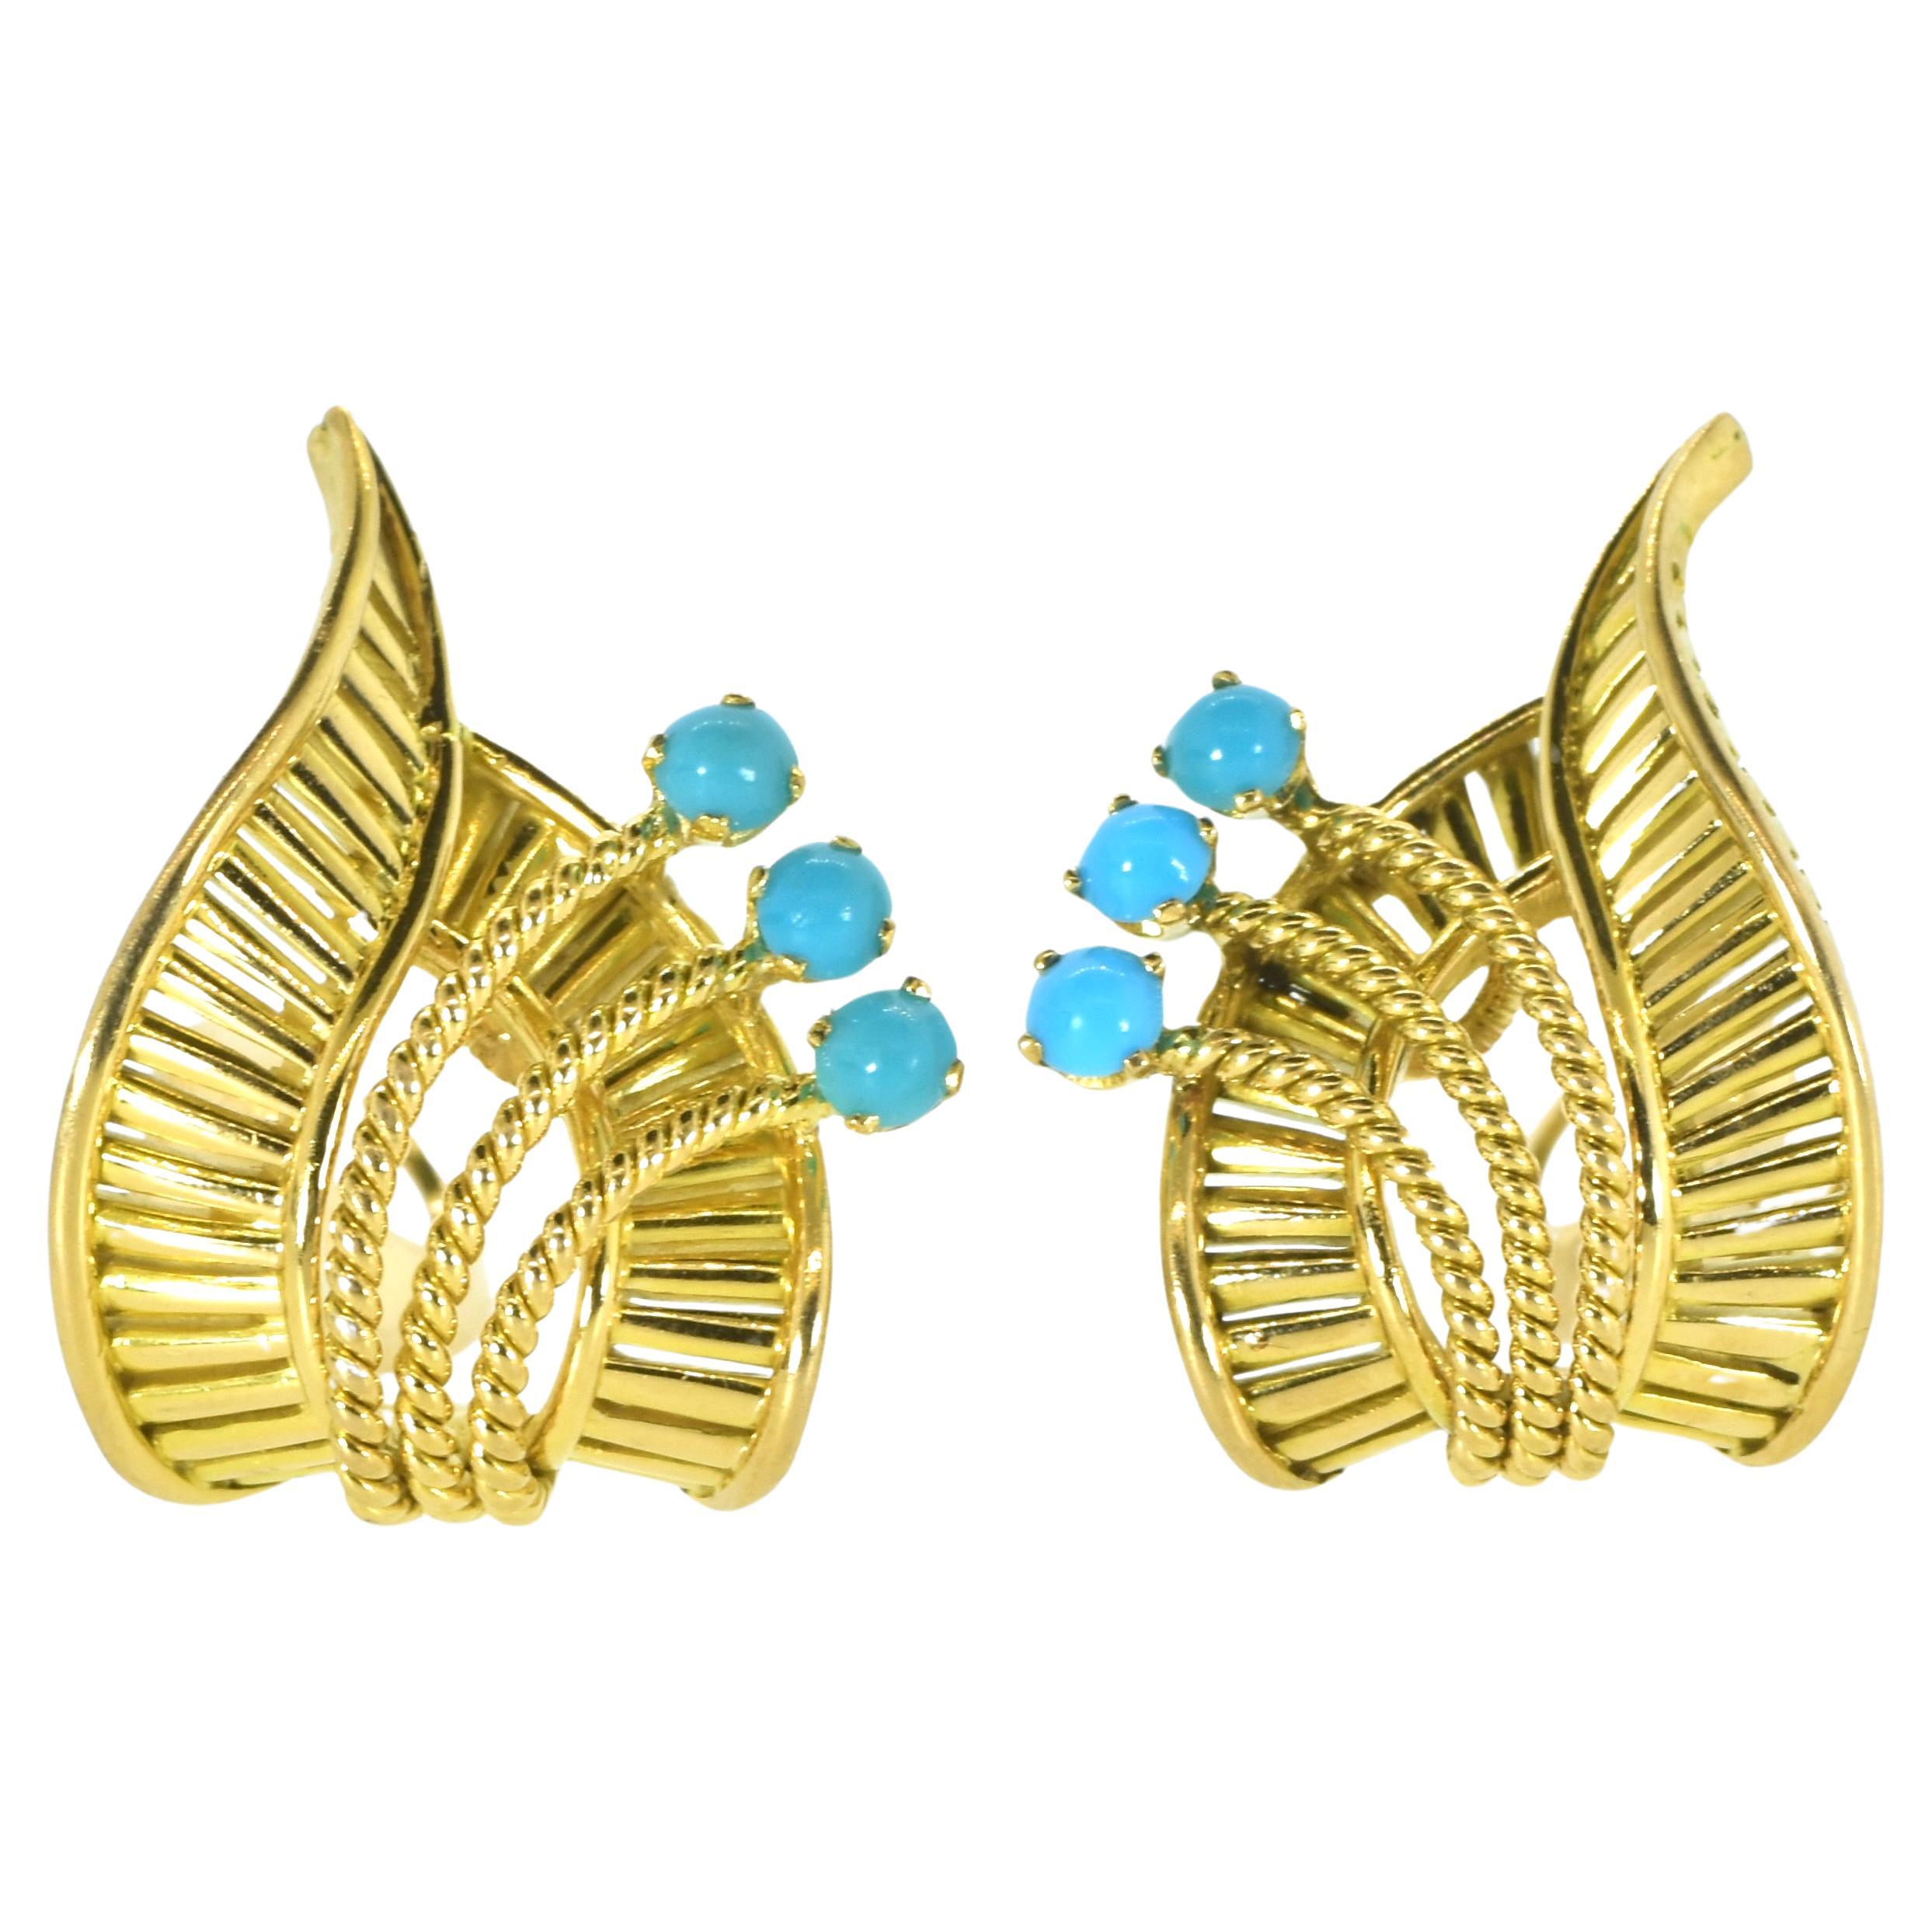 18K Yellow Gold Earrings with Fine Turquoise in a Leaf Motif, Vintage , c. 1950. For Sale